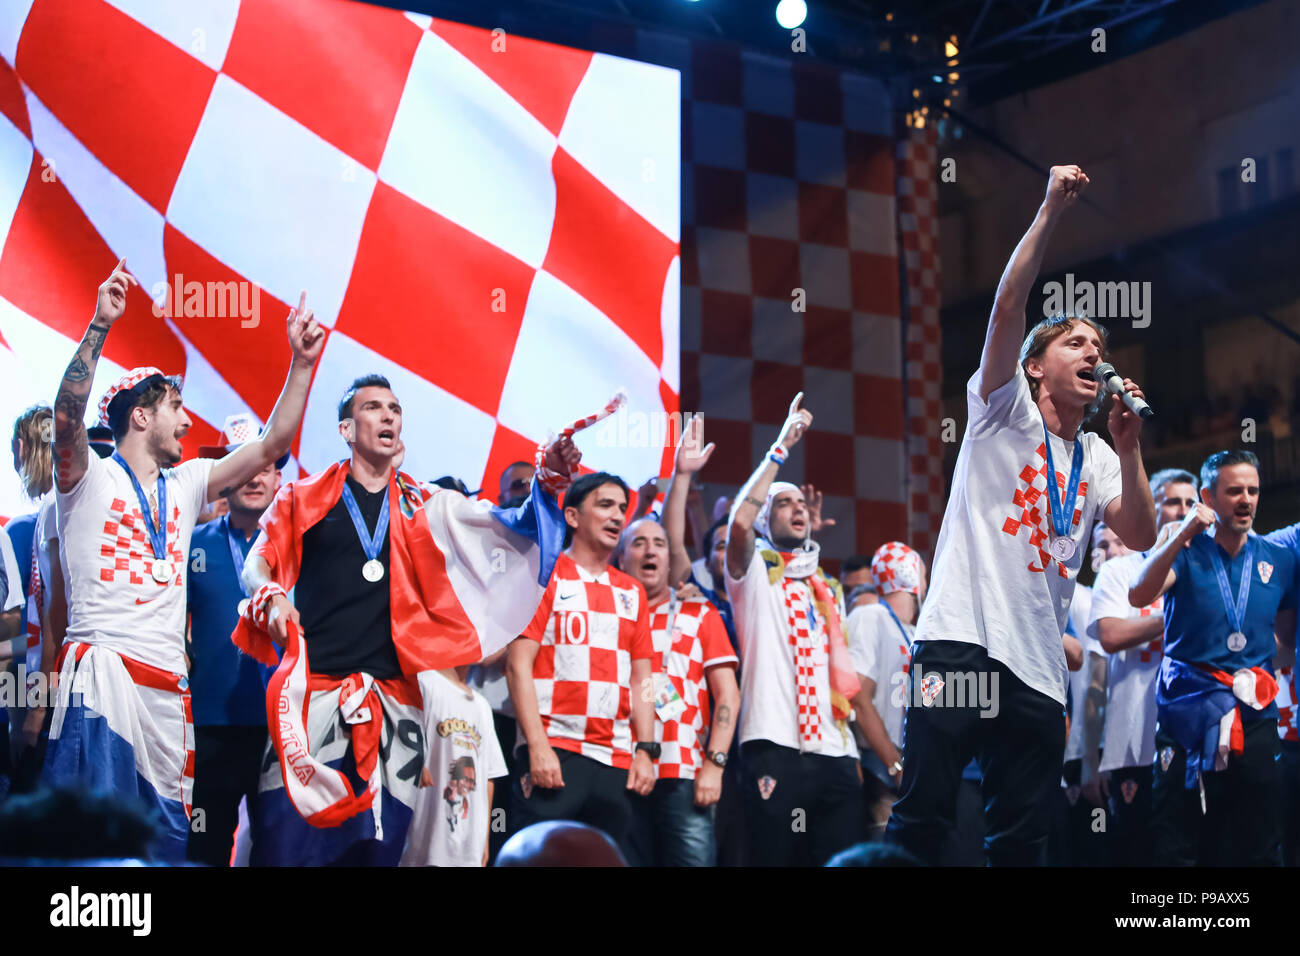 Zagreb, Croatia. 16th July, 2018. Welcome ceremony of Croatian football national team that won 2nd place, silver medal on Fifa World Cup 2018 on Ban Jelacic Square in Zagreb, Croatia. Luka Modric best player on the Fifa World Cup 2018, singing on the stage. Credit: Goran Jakuš/Alamy Live News Stock Photo